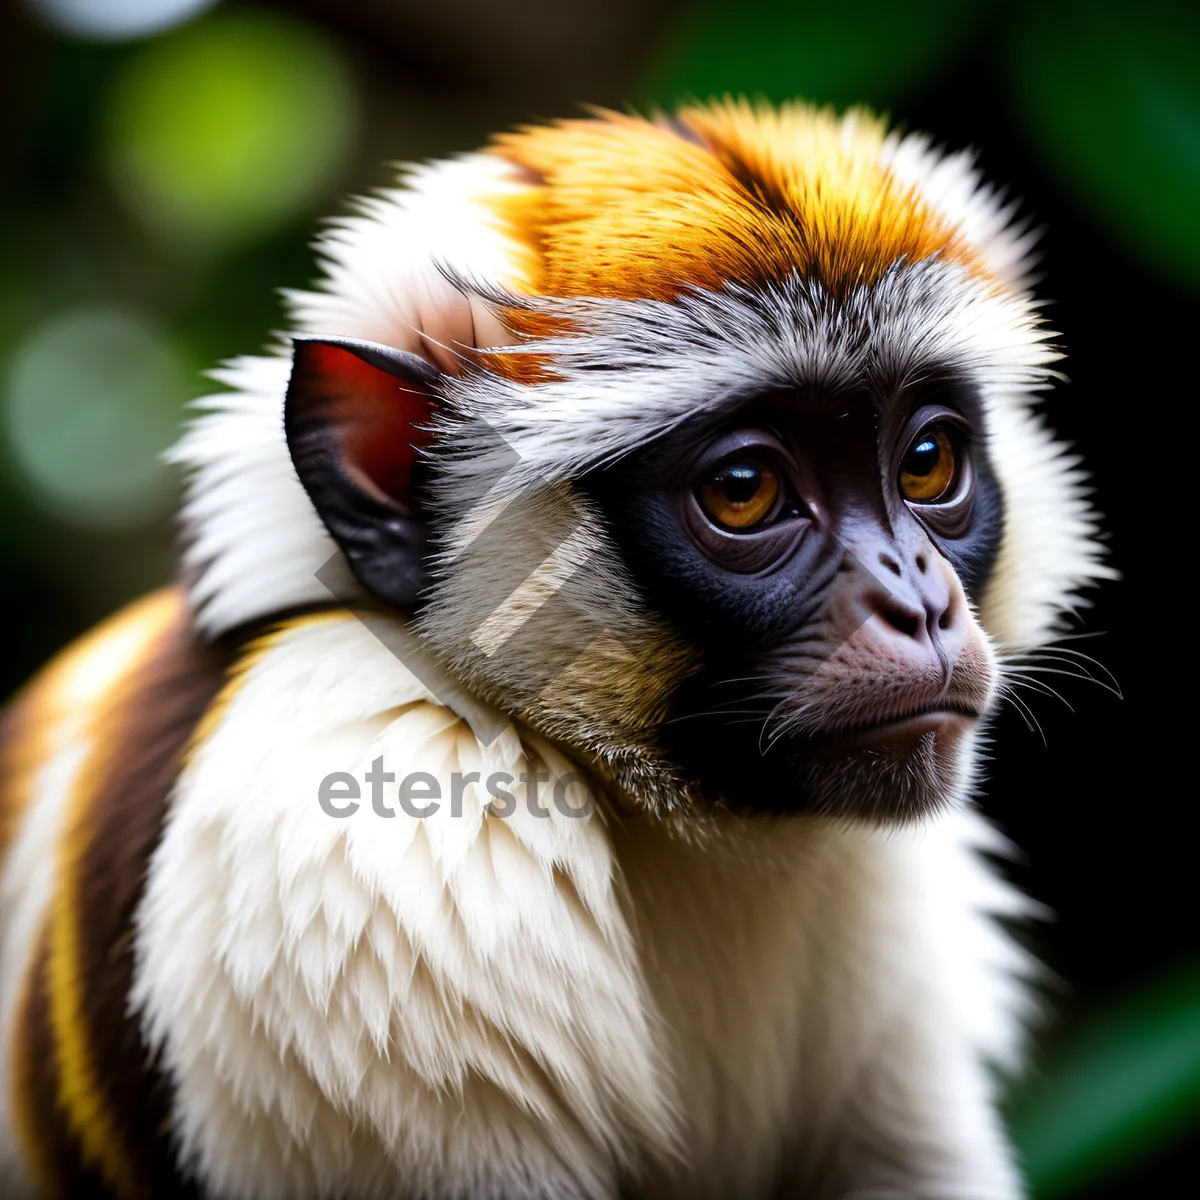 Picture of Wild Primate Monkey with Furry Face